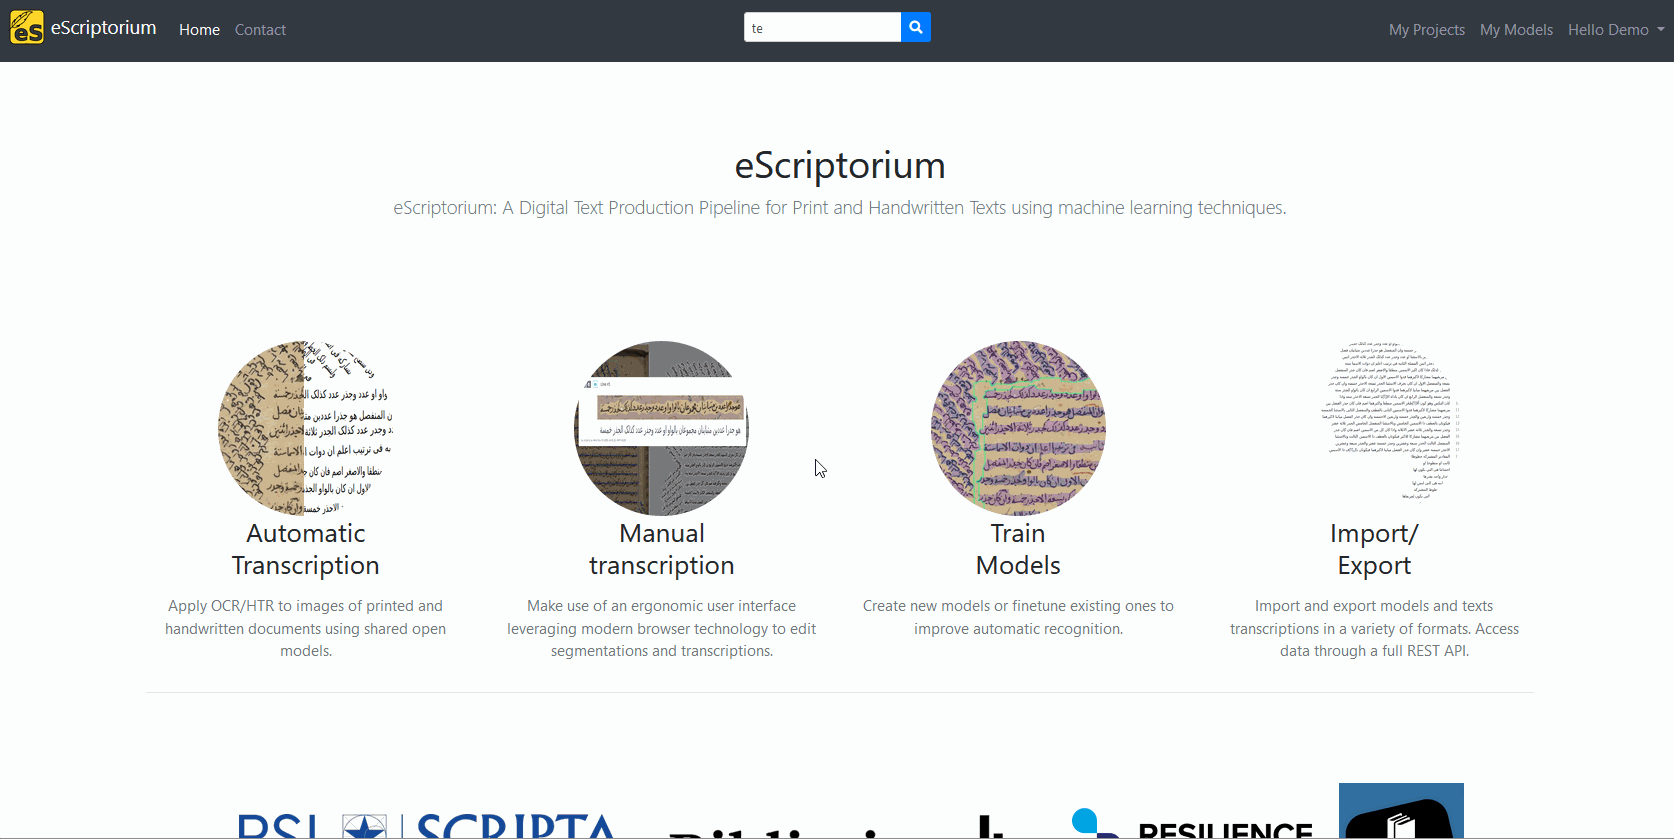 image: Starting a query from eScriptorium homepage, using the search bar